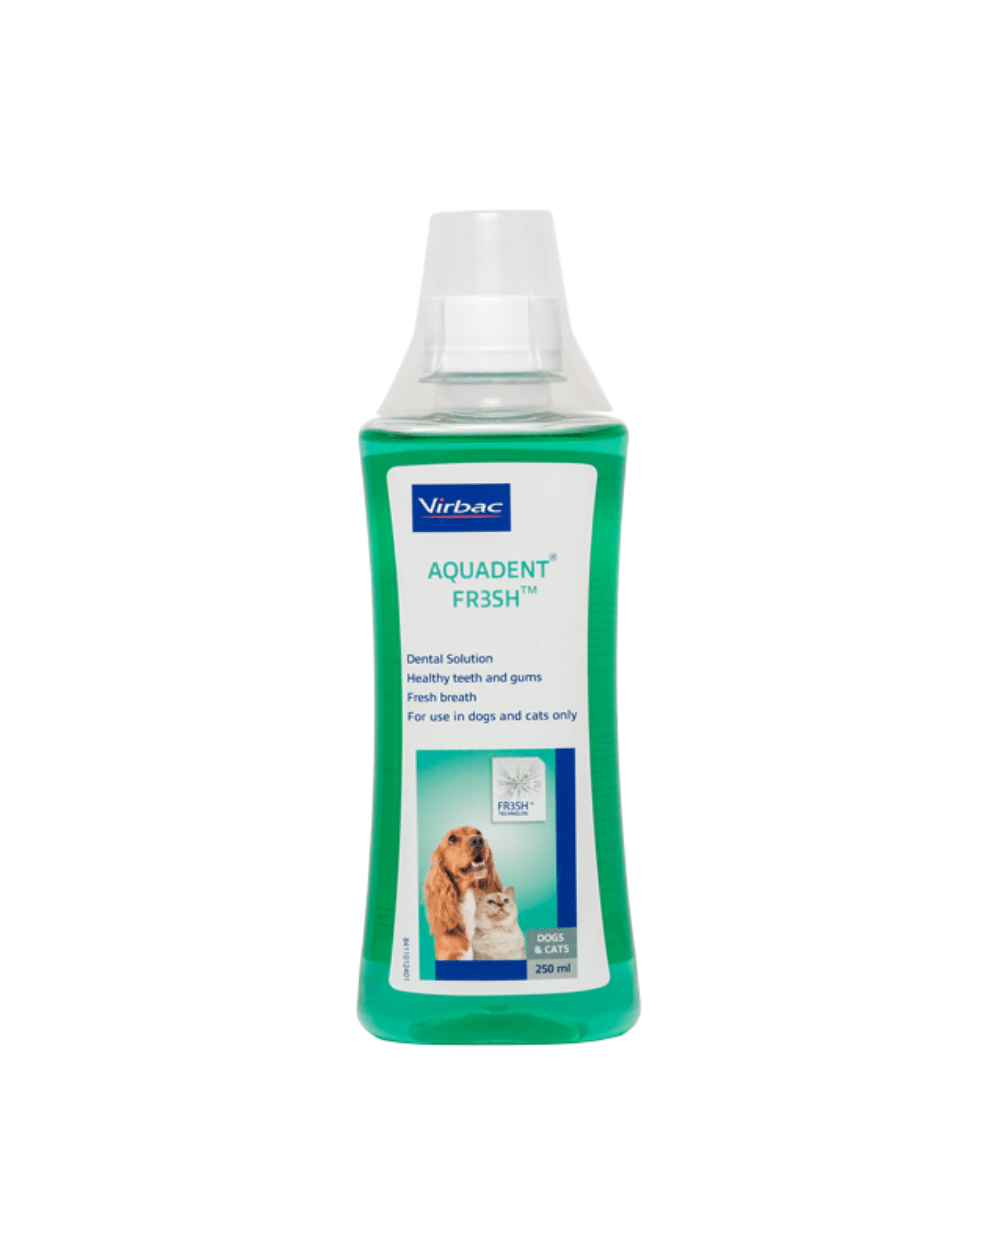 Aquadent Fresh Dental Wash for Dogs and Cats